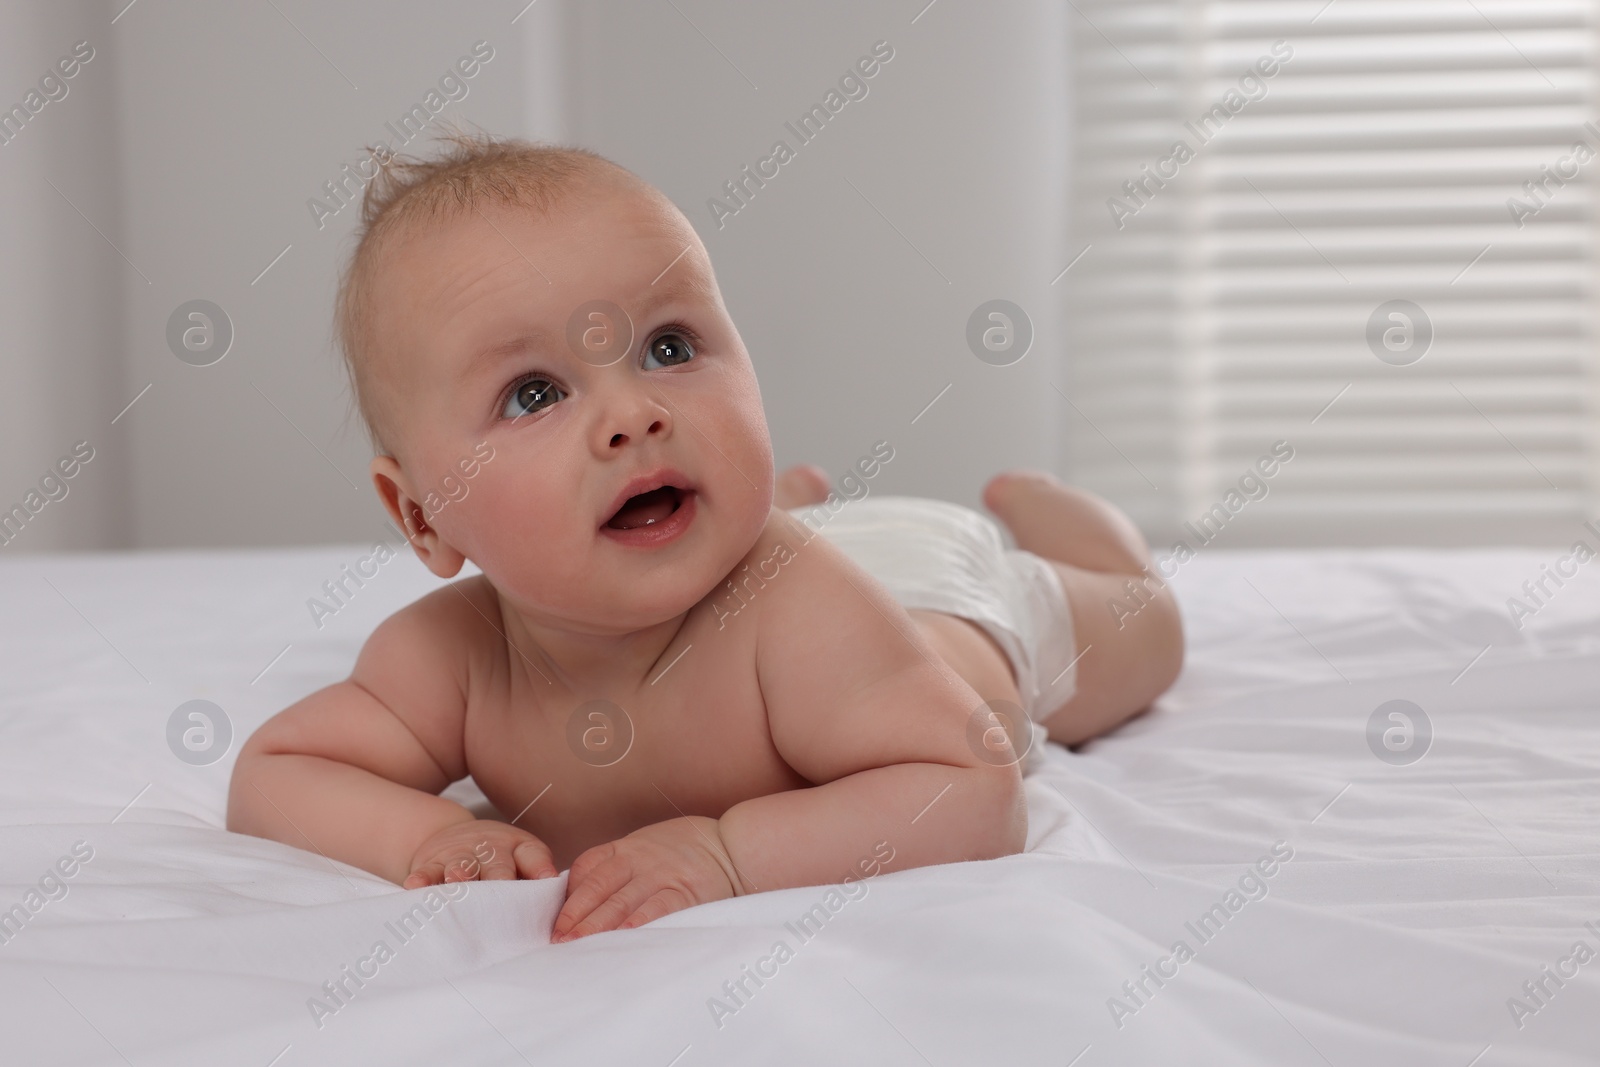 Photo of Cute little baby lying on bed in room, space for text